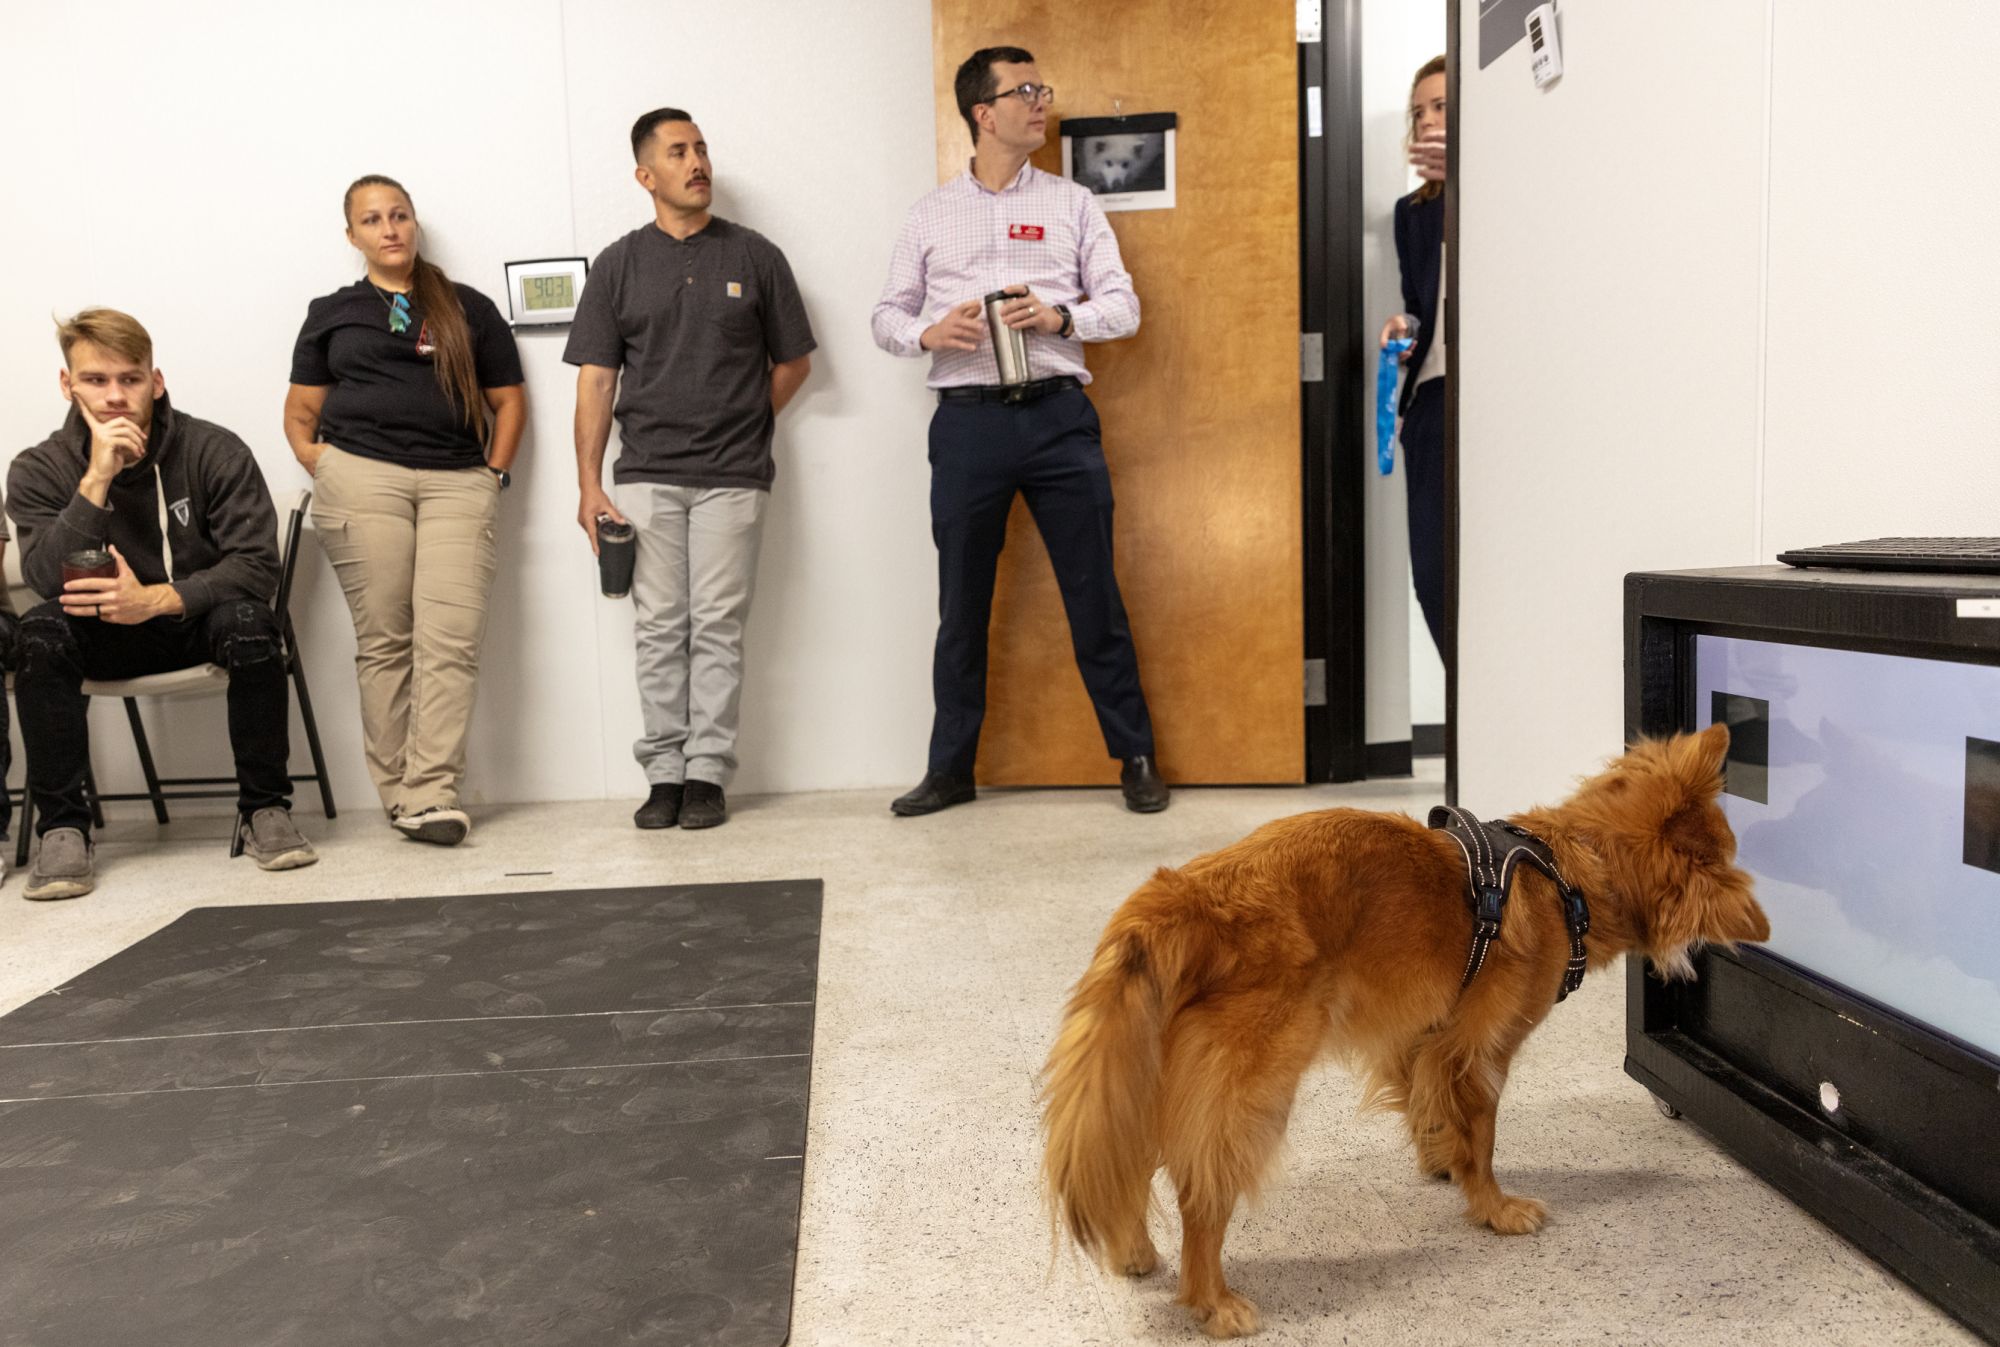 Visitors from Davis-Monthan Air Force Base observe a dog completing a trial at the Arizona Canine Cognition Center